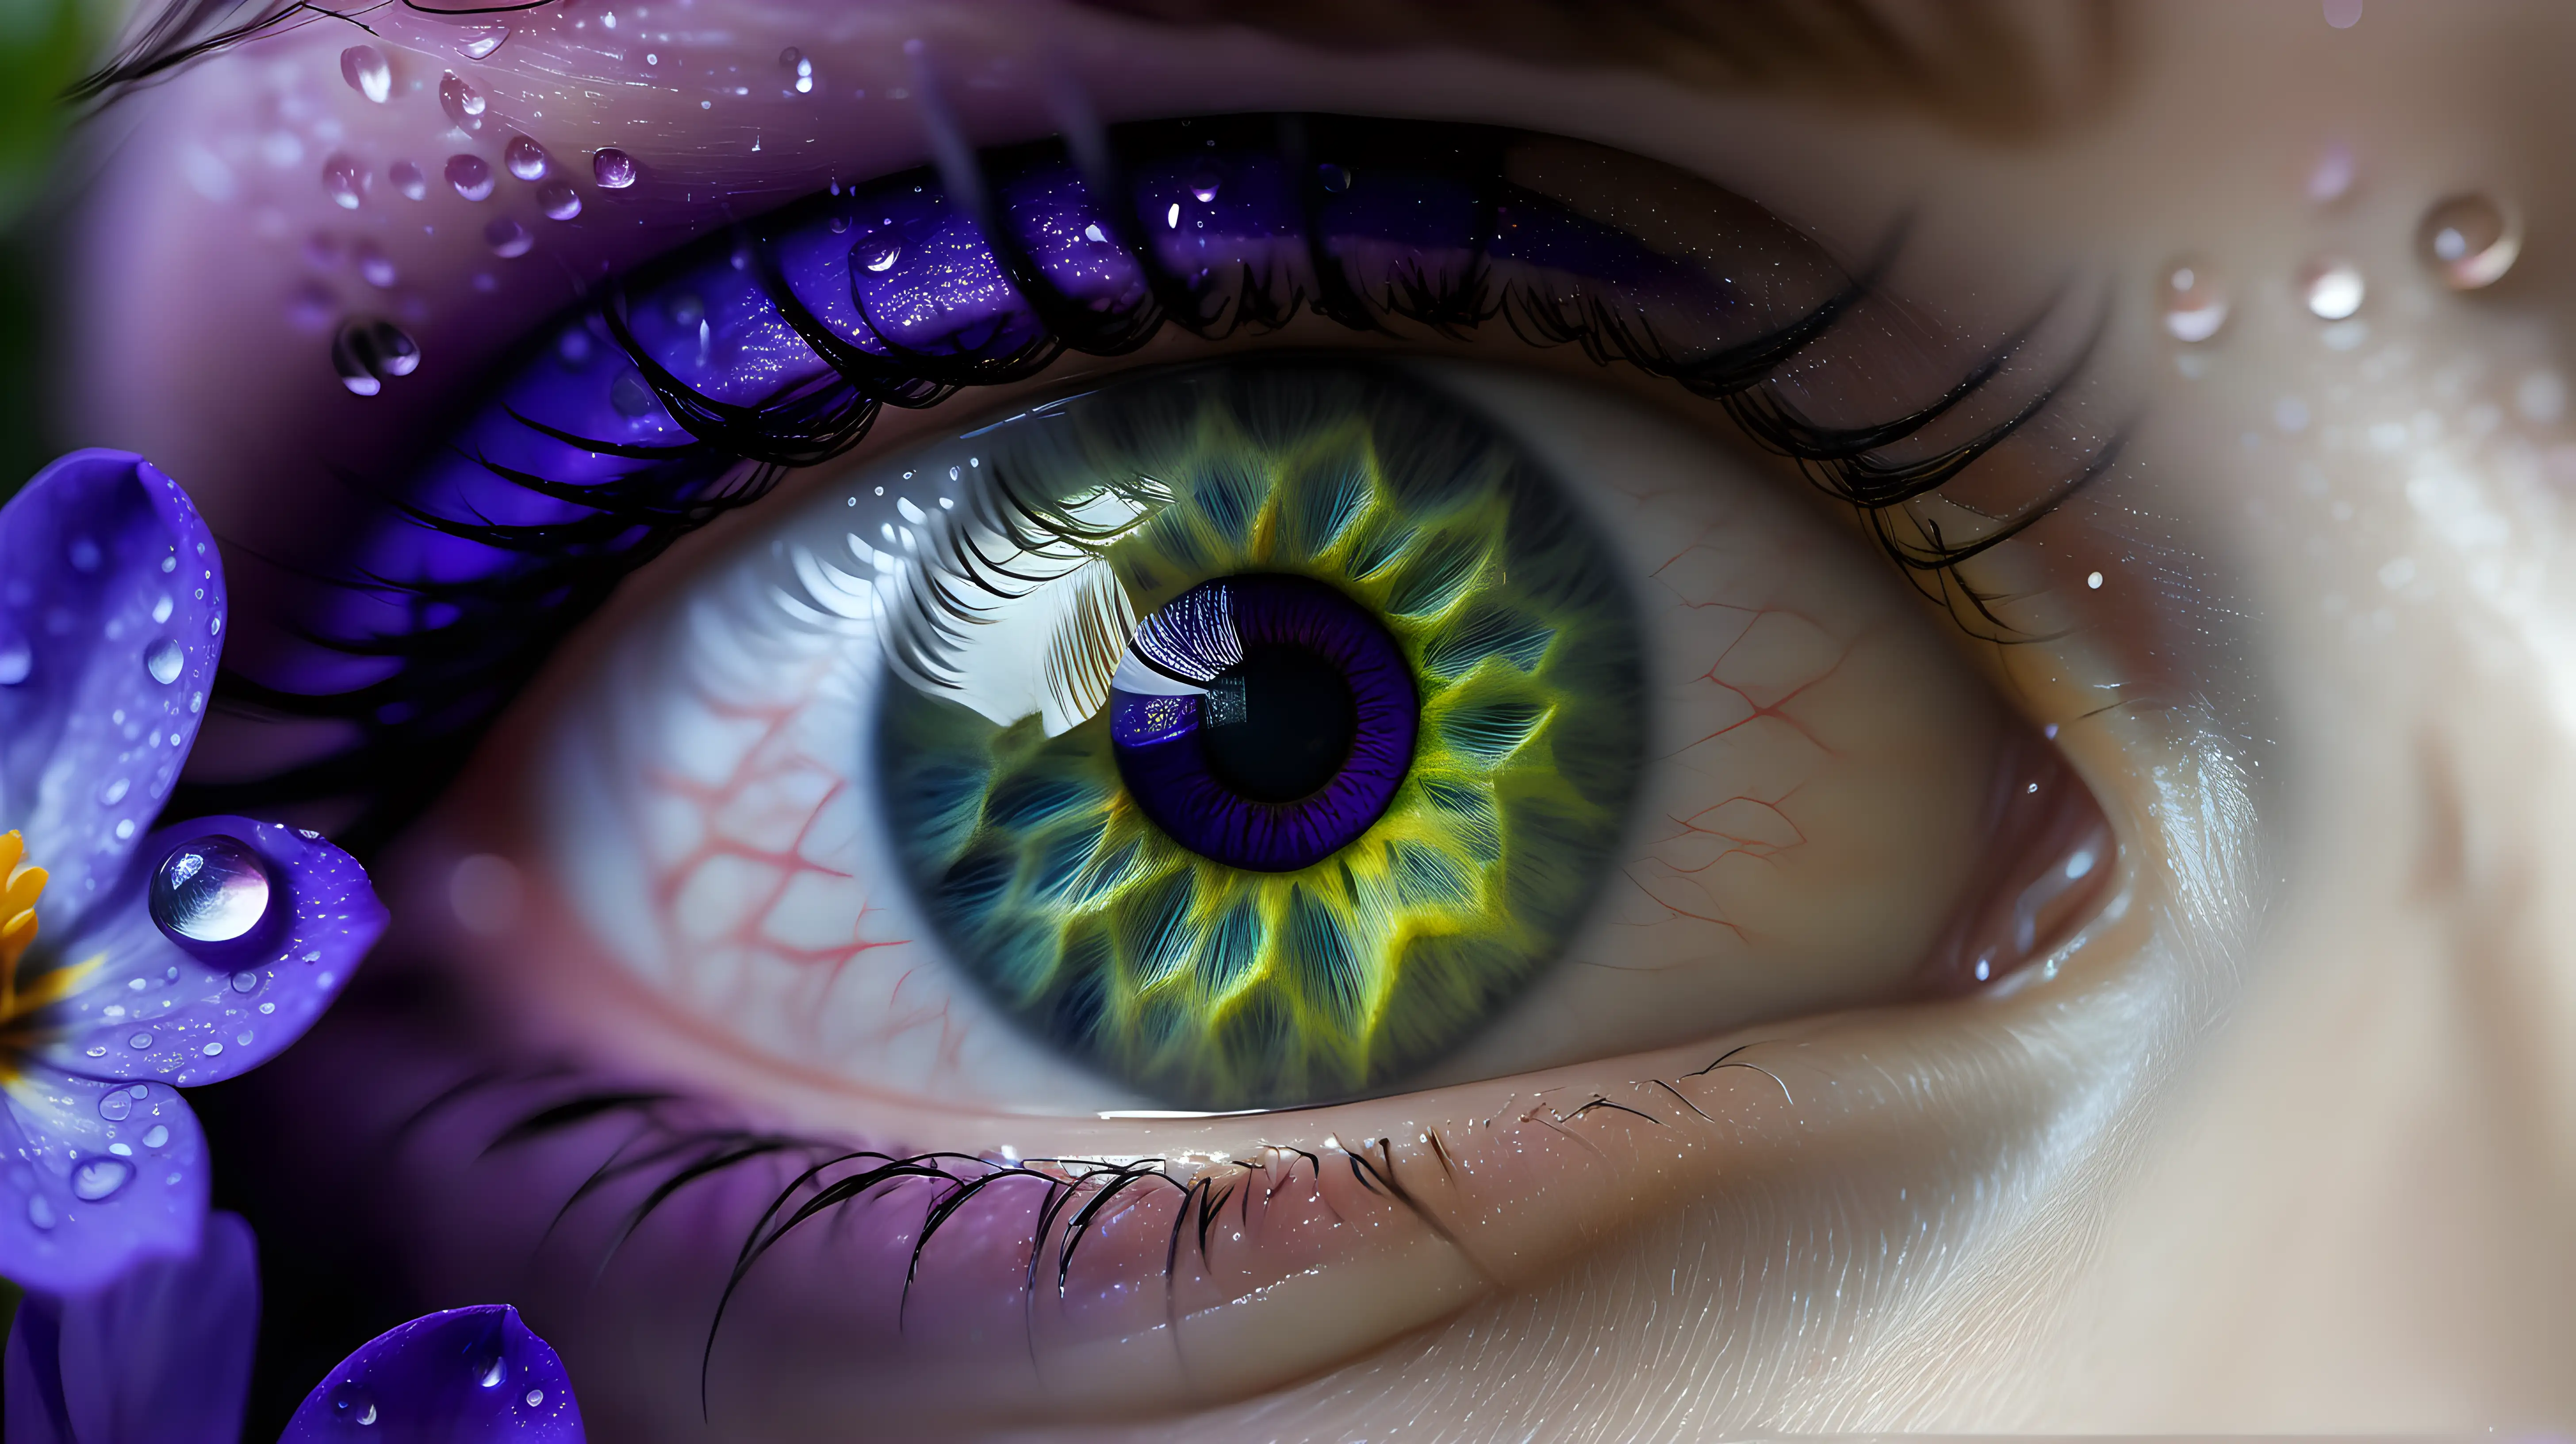 /imagine prompt: A macro photograph of a green eye, flecked with golden hues, amidst a blooming garden of violet and indigo flowers, with gentle raindrops visible on the eyelashes. Created Using: Vivid color contrasts, hyper-realistic textures, serene expression, nature-inspired hues, clear focus on the eye, blurred floral background, reflective water droplets, tranquil atmosphere --ar 3:4 --v 6.0